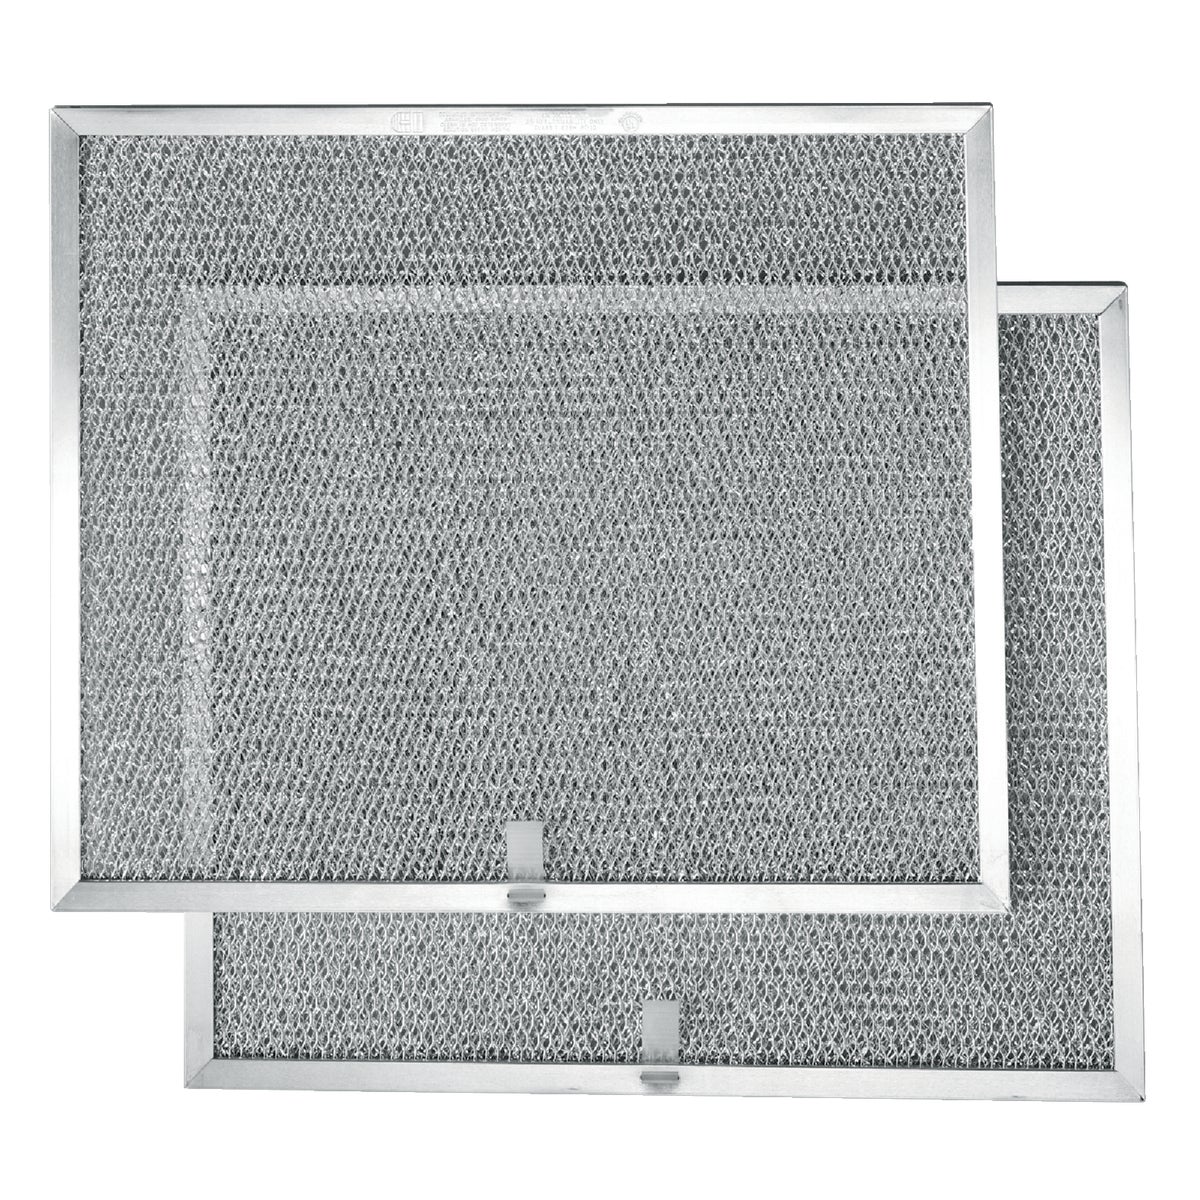 Item 285668, Replacement filter for 30" Allure I (QS) series convertible range hoods.